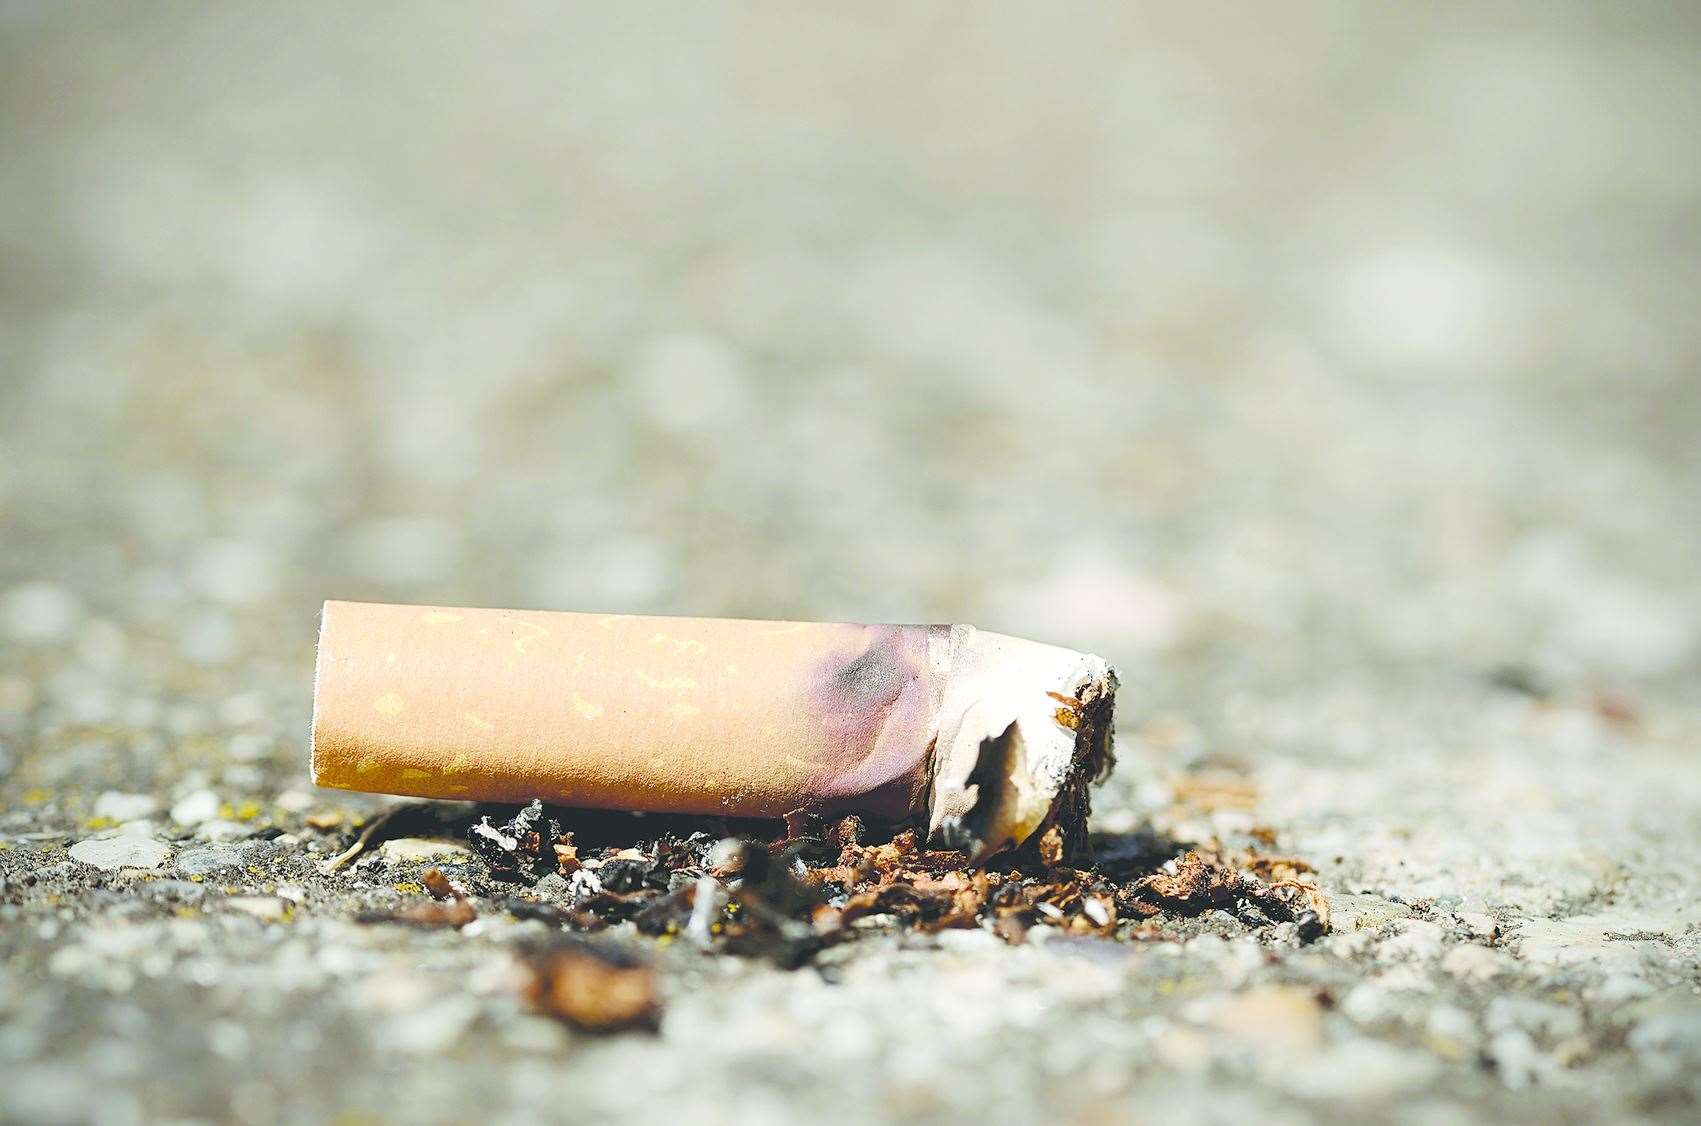 The survey listed the top three Kent councils for cigarette butt fines